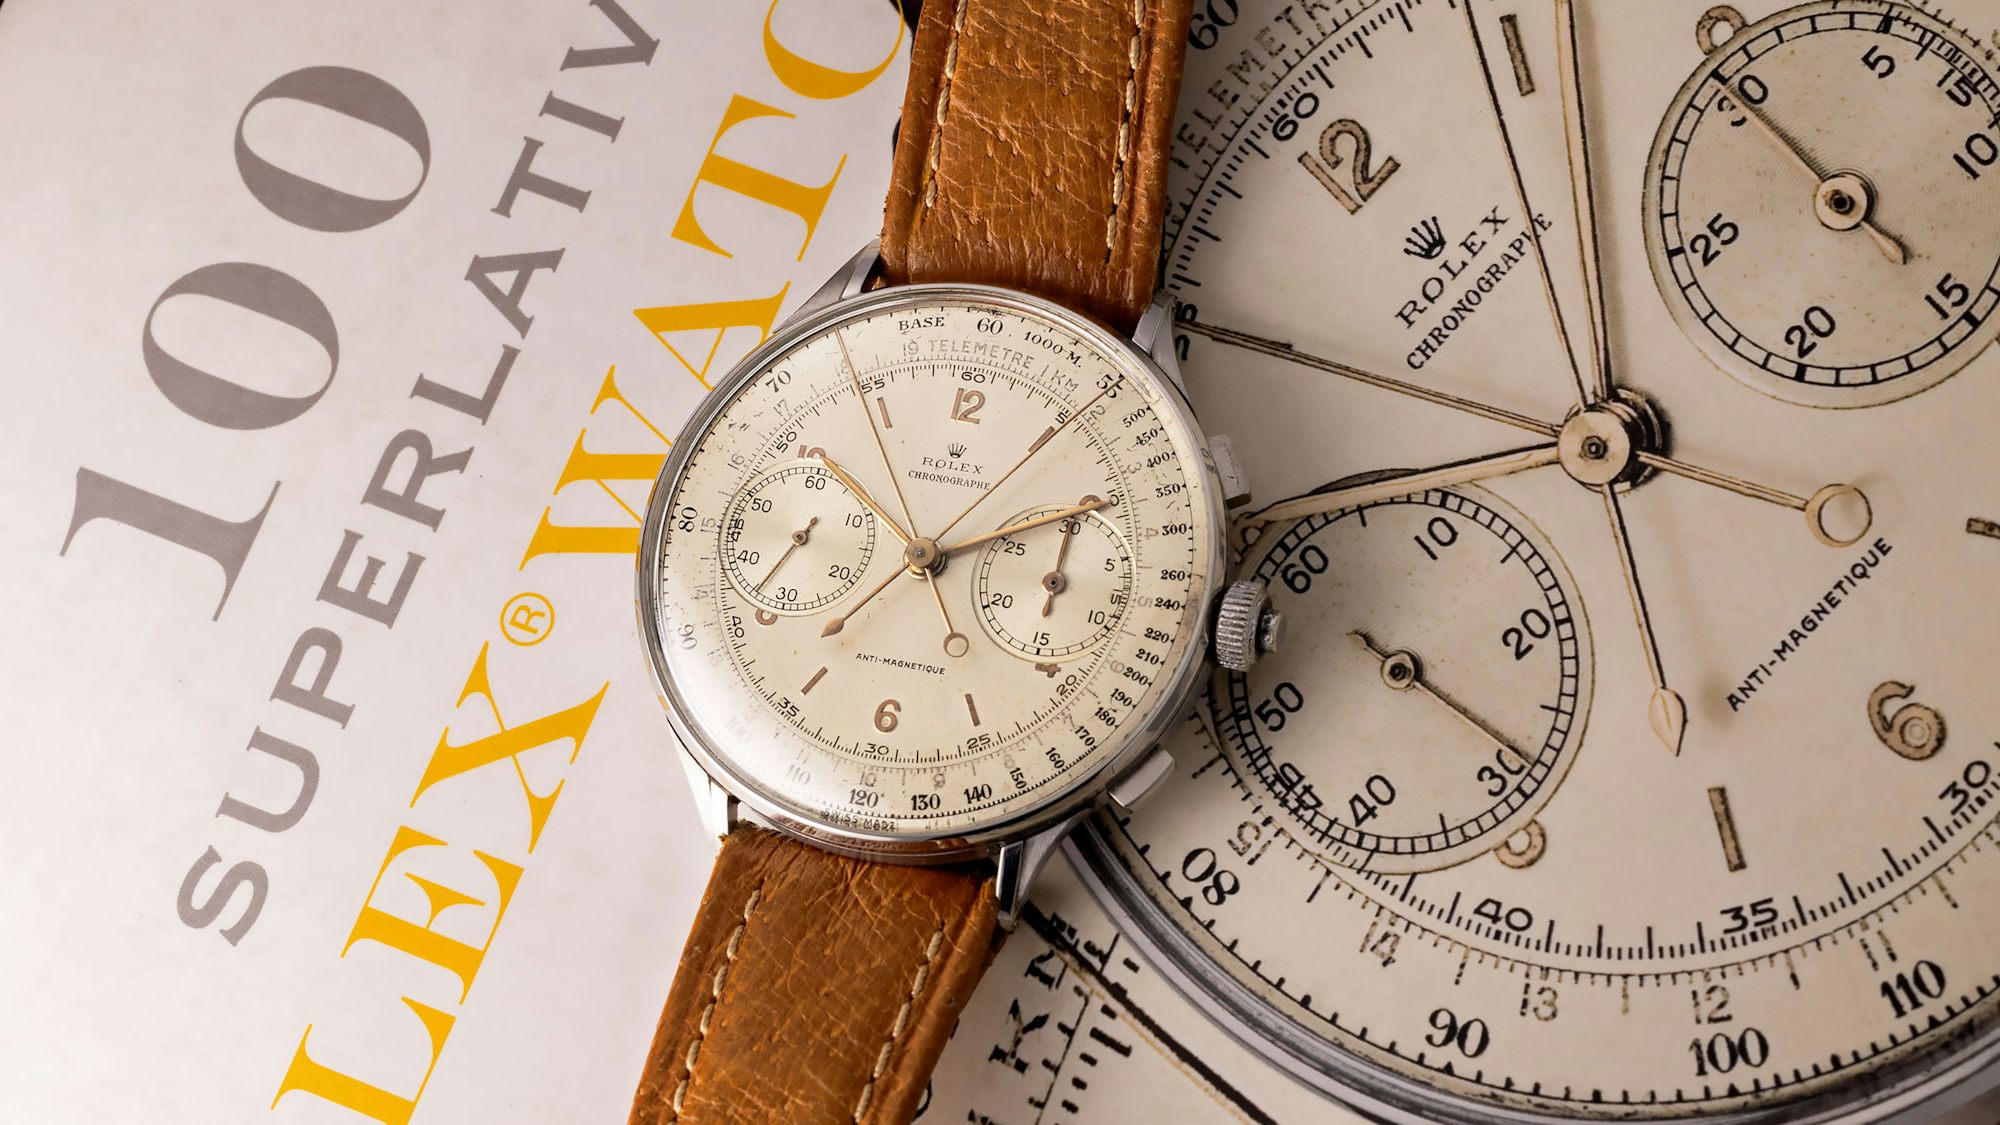 Auctions: Monaco Legend Group To Sell One Of Twelve Rolex Ref. 4113 Split-Second Chronographs